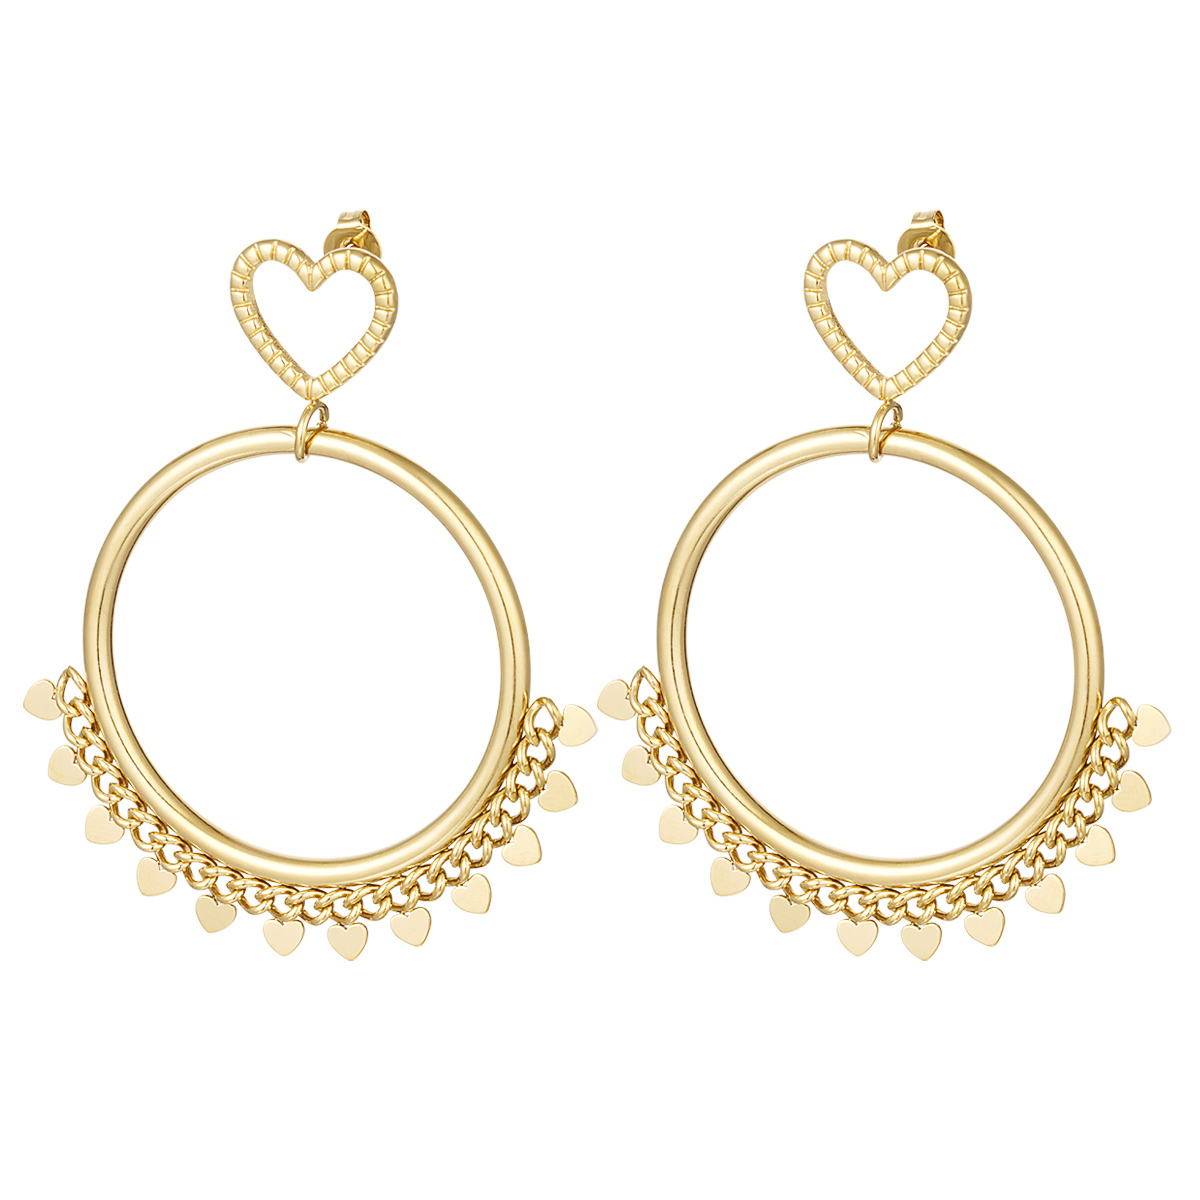 Earrings with heart details